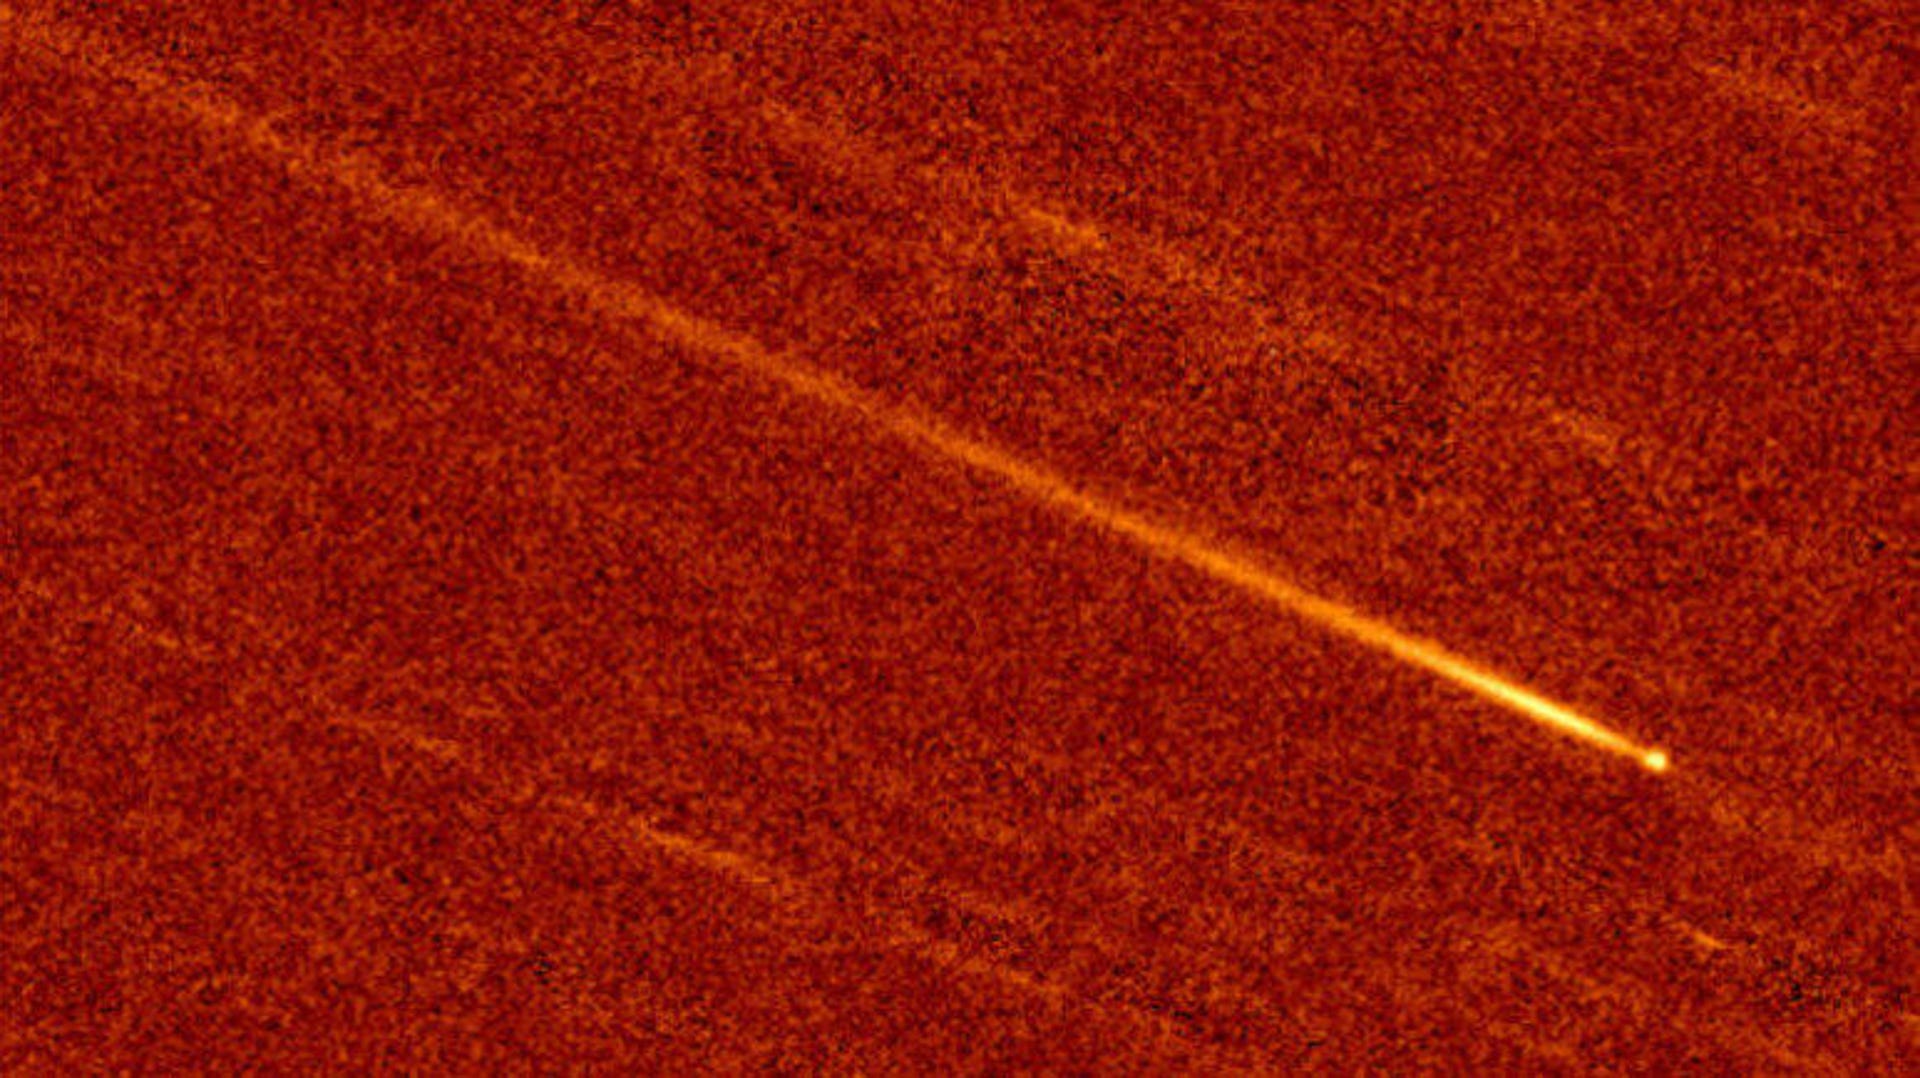 A yellowish streak of light against a red background shows how a near-sun comet developed a tail after close encounter with the sun.